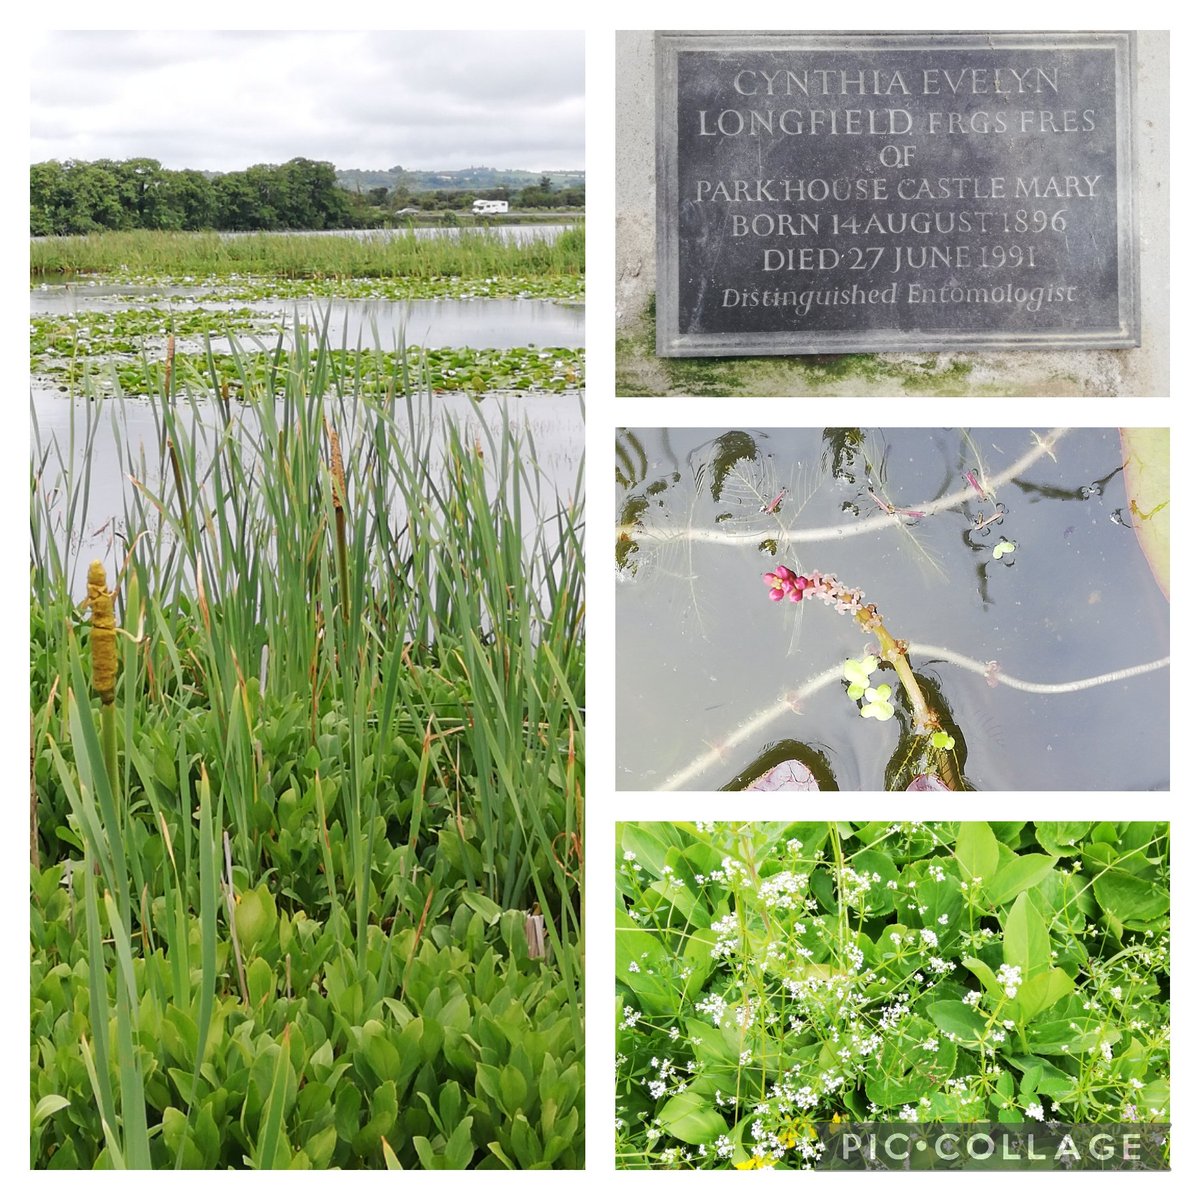 Time to recall the Dragonfly Lady, Cynthia Longfield, whose work earned her worldwide acclaim. She lived in Cloyne, E. Cork & is buried in the churchyard of St  Colman's Cathedral. Some emerging Bulrush, 
Marsh-bedstraw & a Water-milfoil spike for #PondPlants & #WildflowerHour.